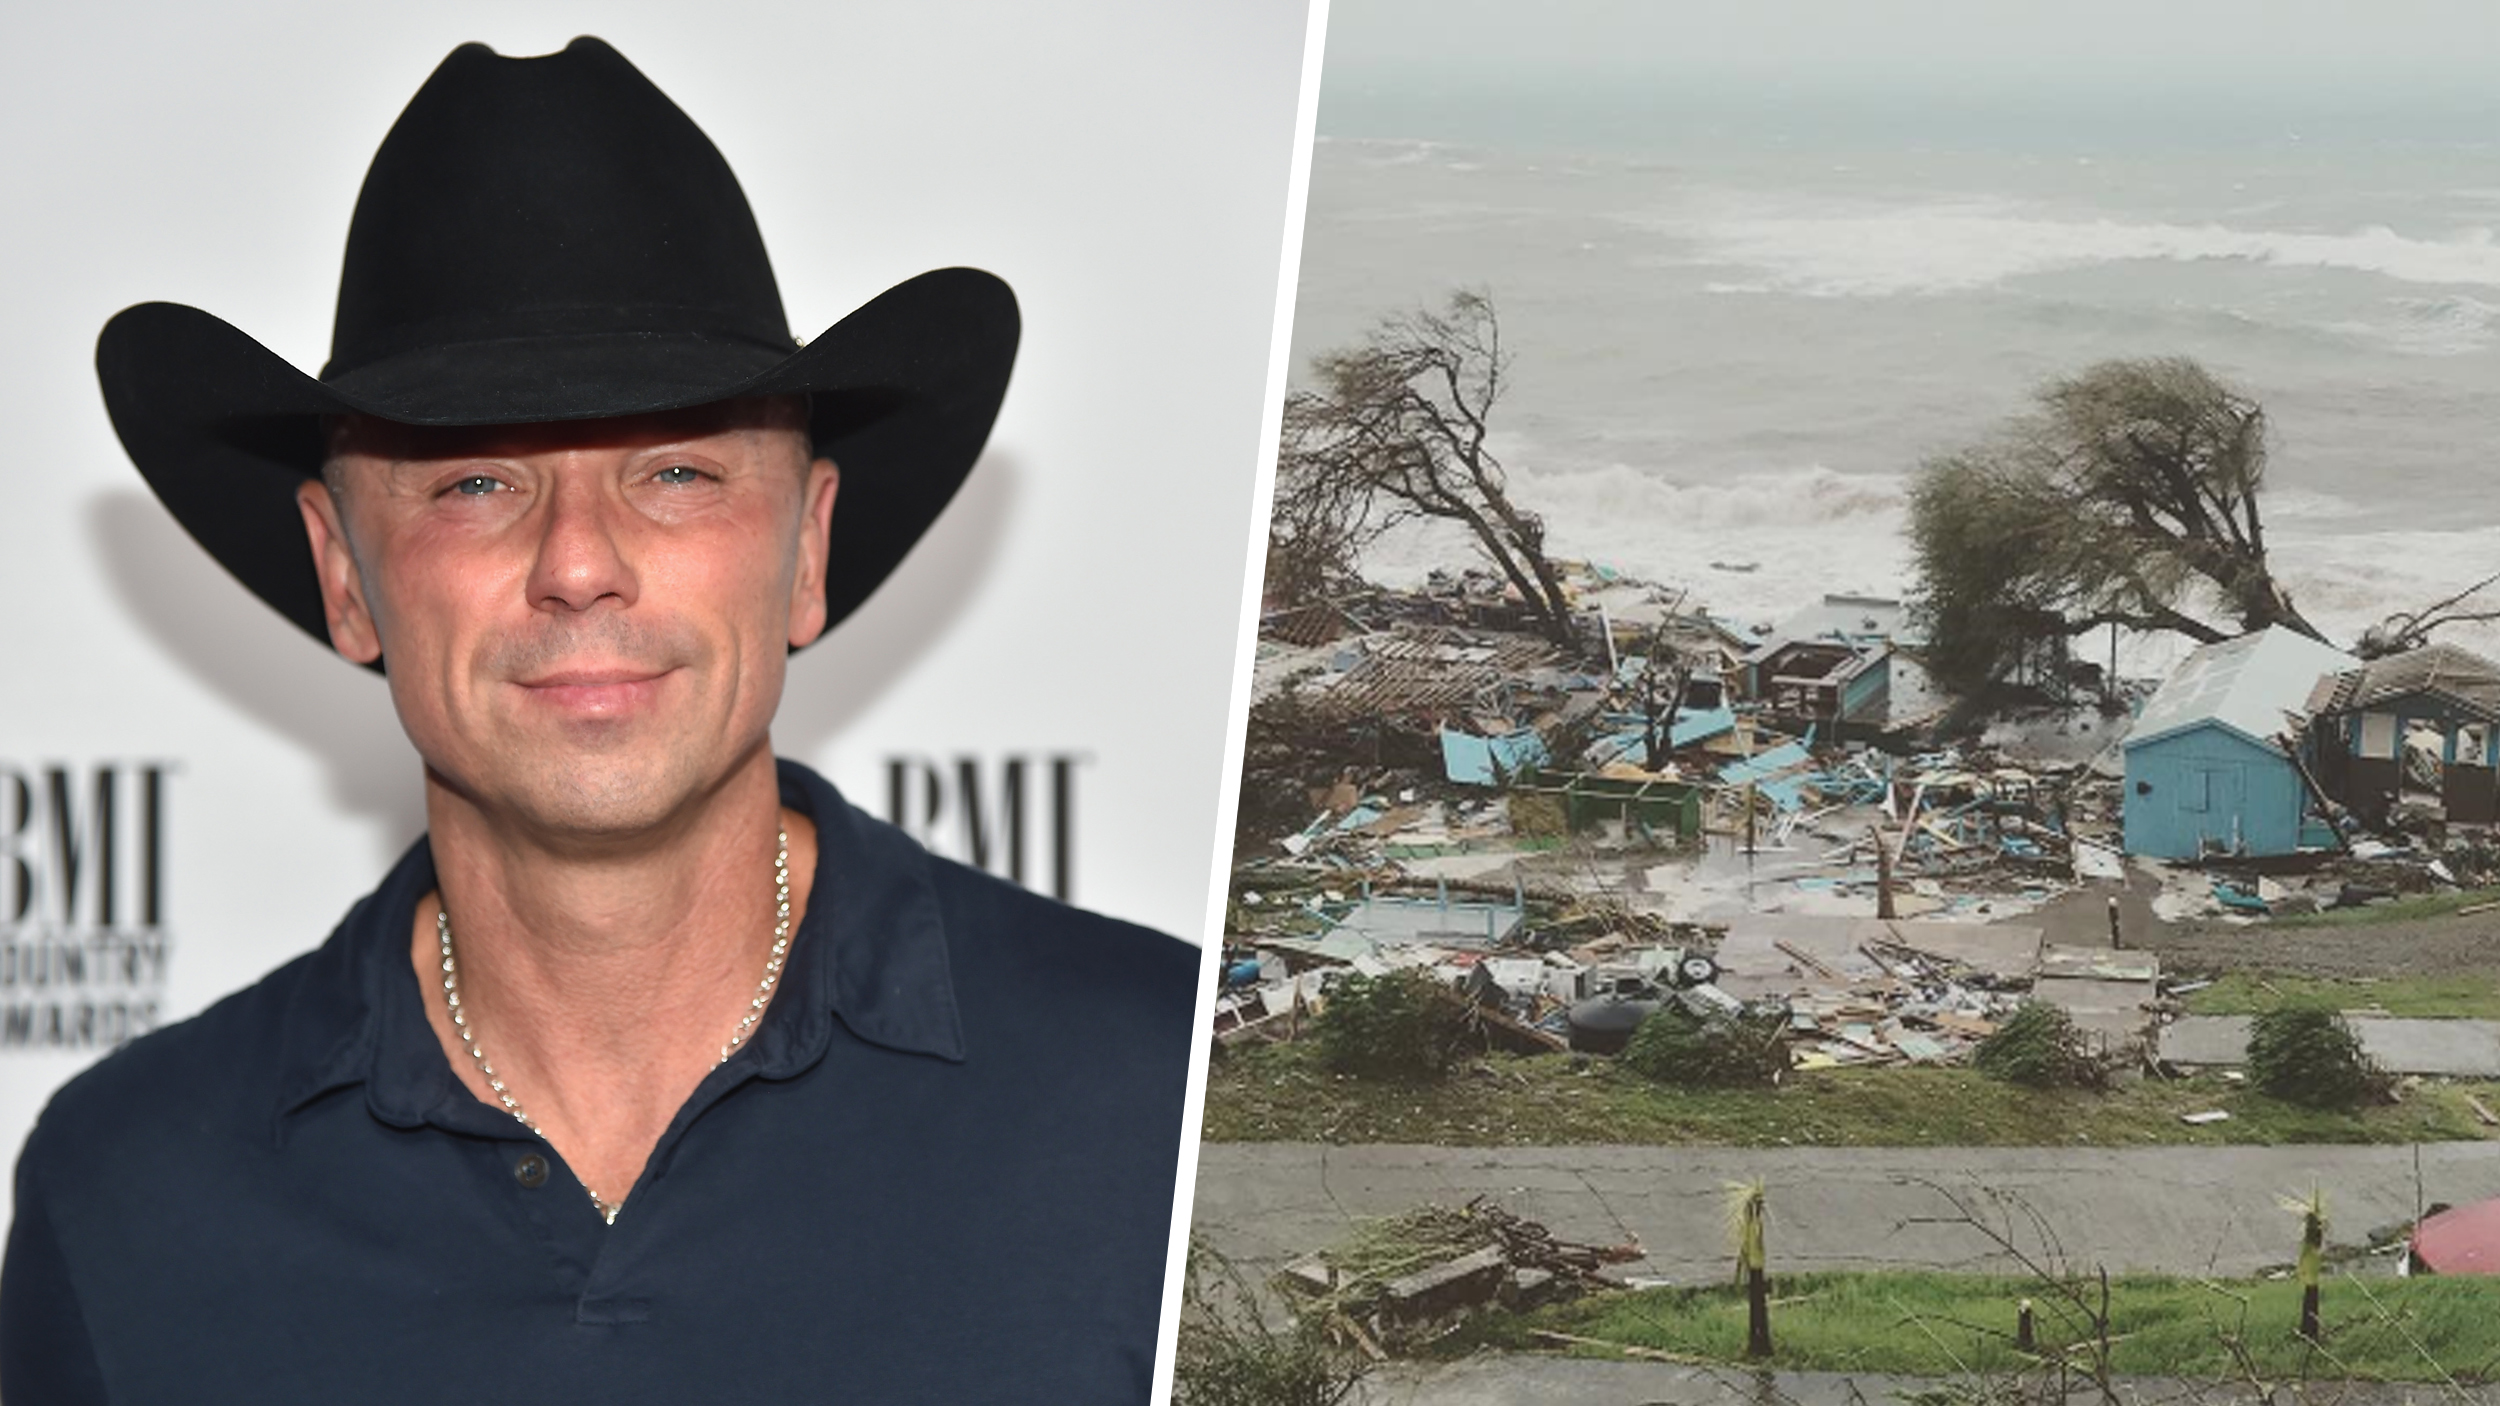 IT'S A DOG'S LIFE: Country Superstar Kenny Chesney Rescues 250 Animals From The Virgin Islands After Hurricane Irma